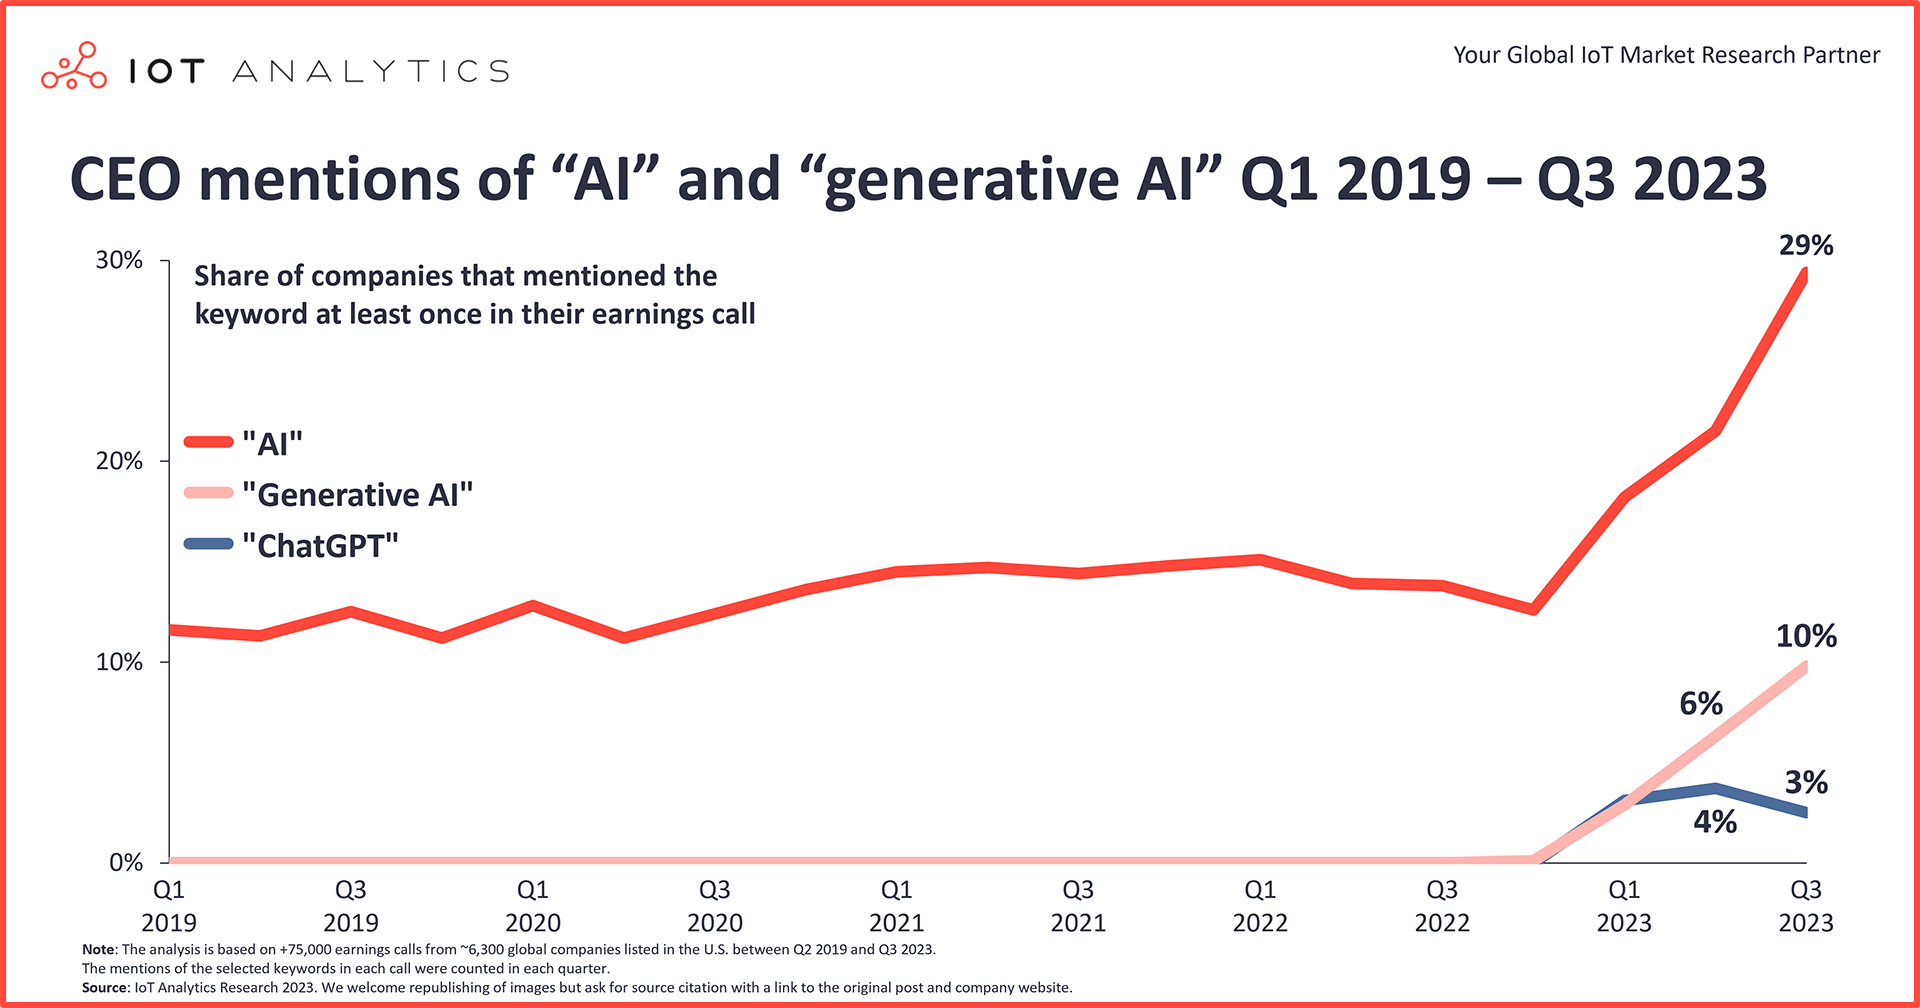 CEO mentions of AI and Generative AI Q1 2019 to Q3 2023